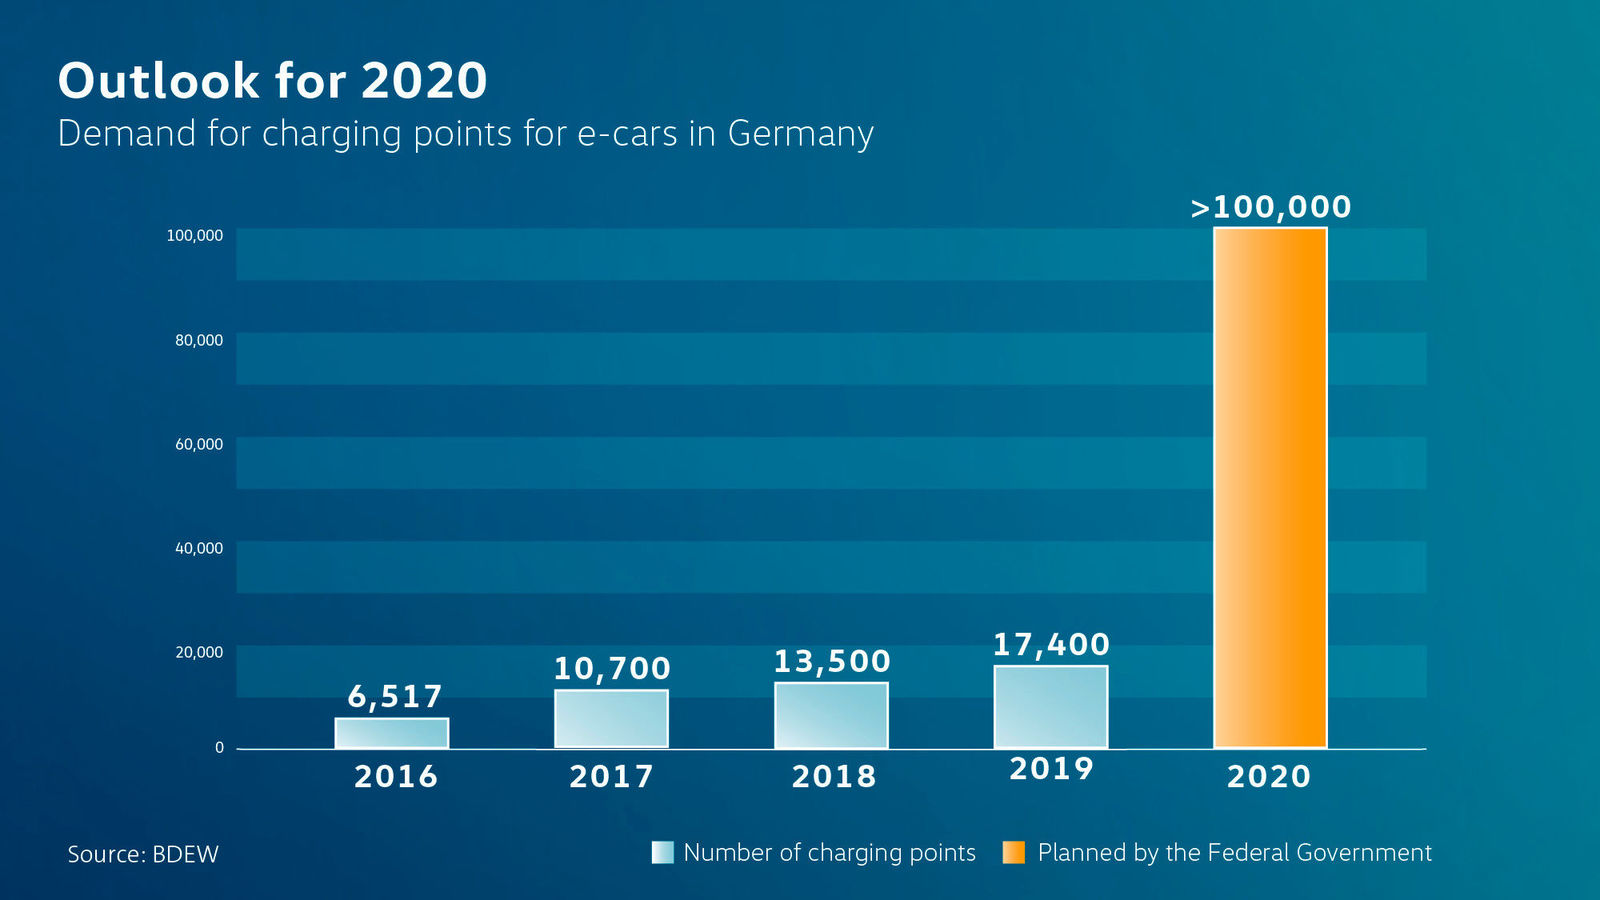 Volkswagen plans 36,000 charging points for electric cars throughout Europe